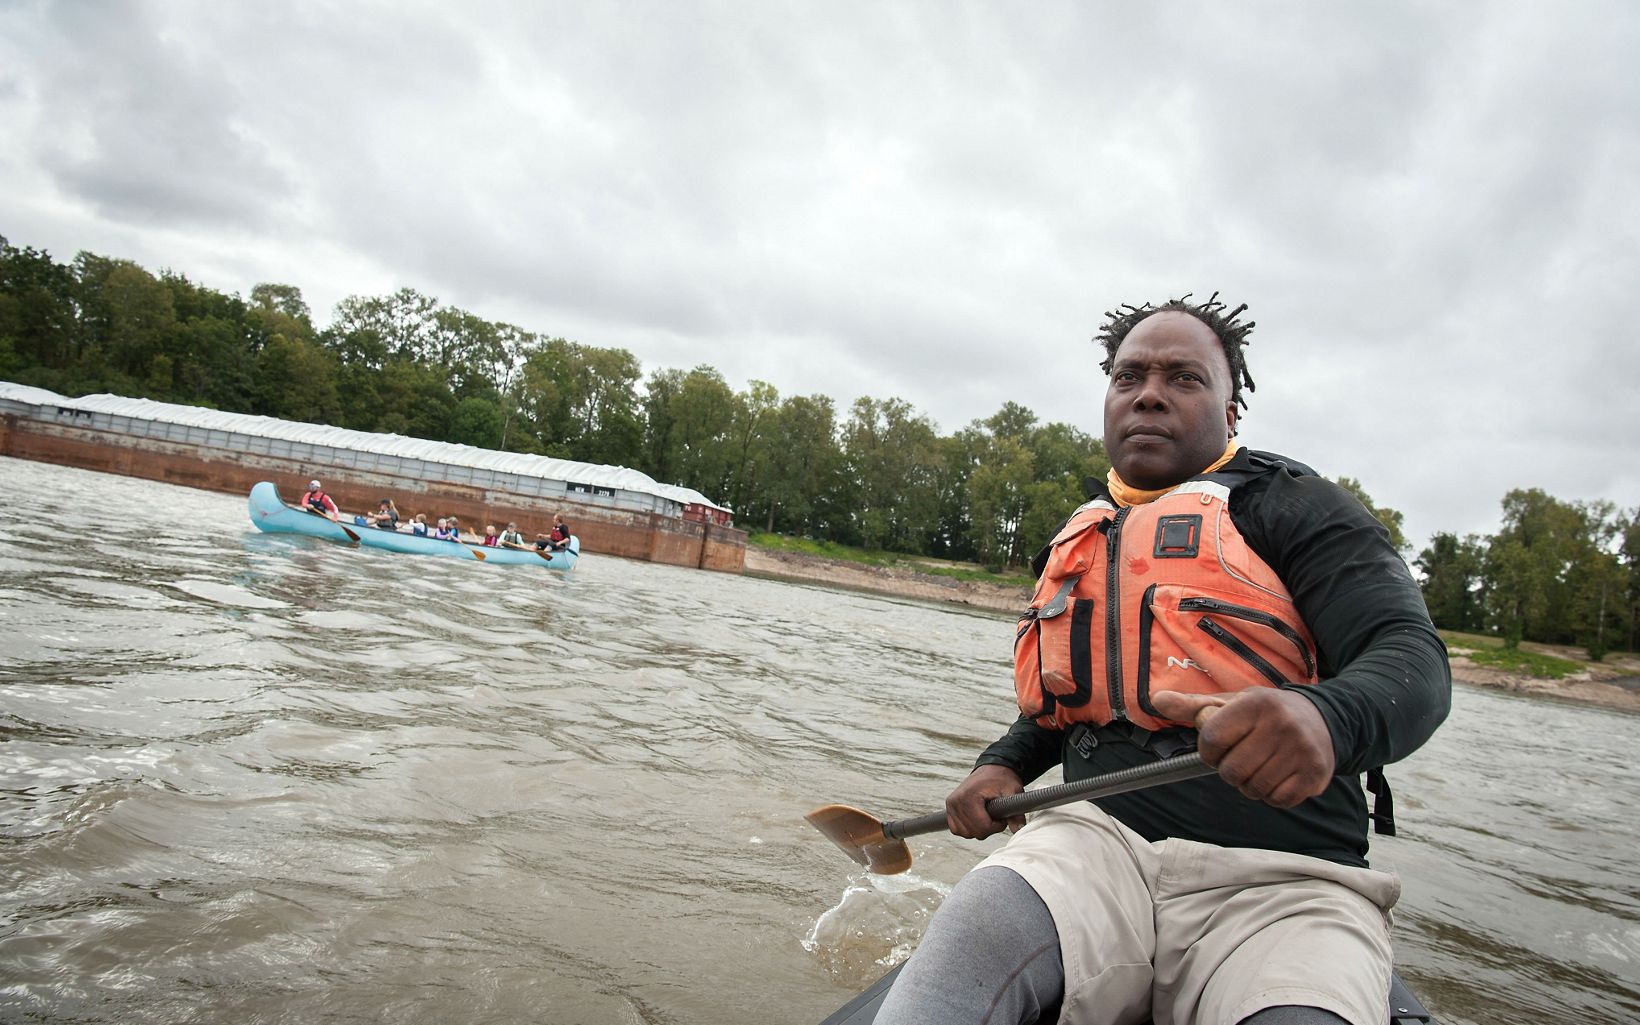 
                
                  Namesake Mark "River" Peoples leads a canoe trip on the Mississippi. Peoples, a former NFL player who grew up next to the river,  has made it his mission to advocate for the river.
                  © Rory Doyle
                
              